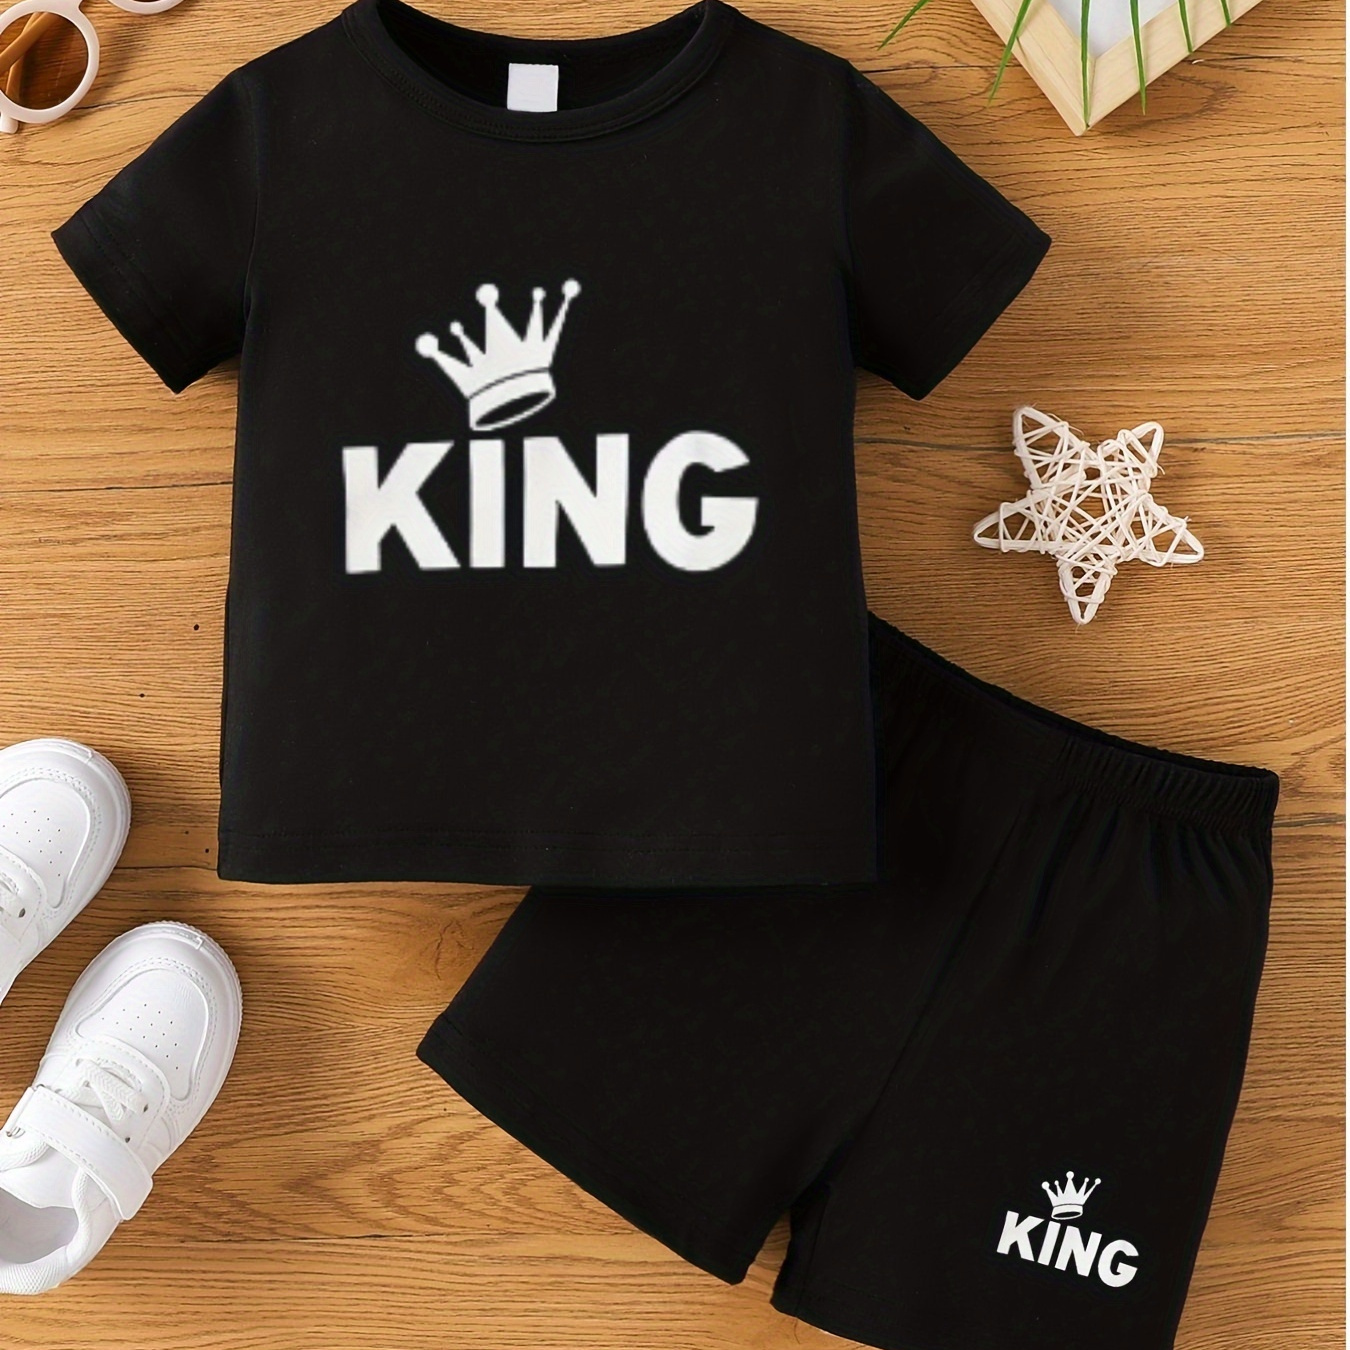 

Baby's "king" & Crown Print 2pcs Summer Casual Outfit, T-shirt & Shorts Set, Toddler & Infant Boy's Clothes